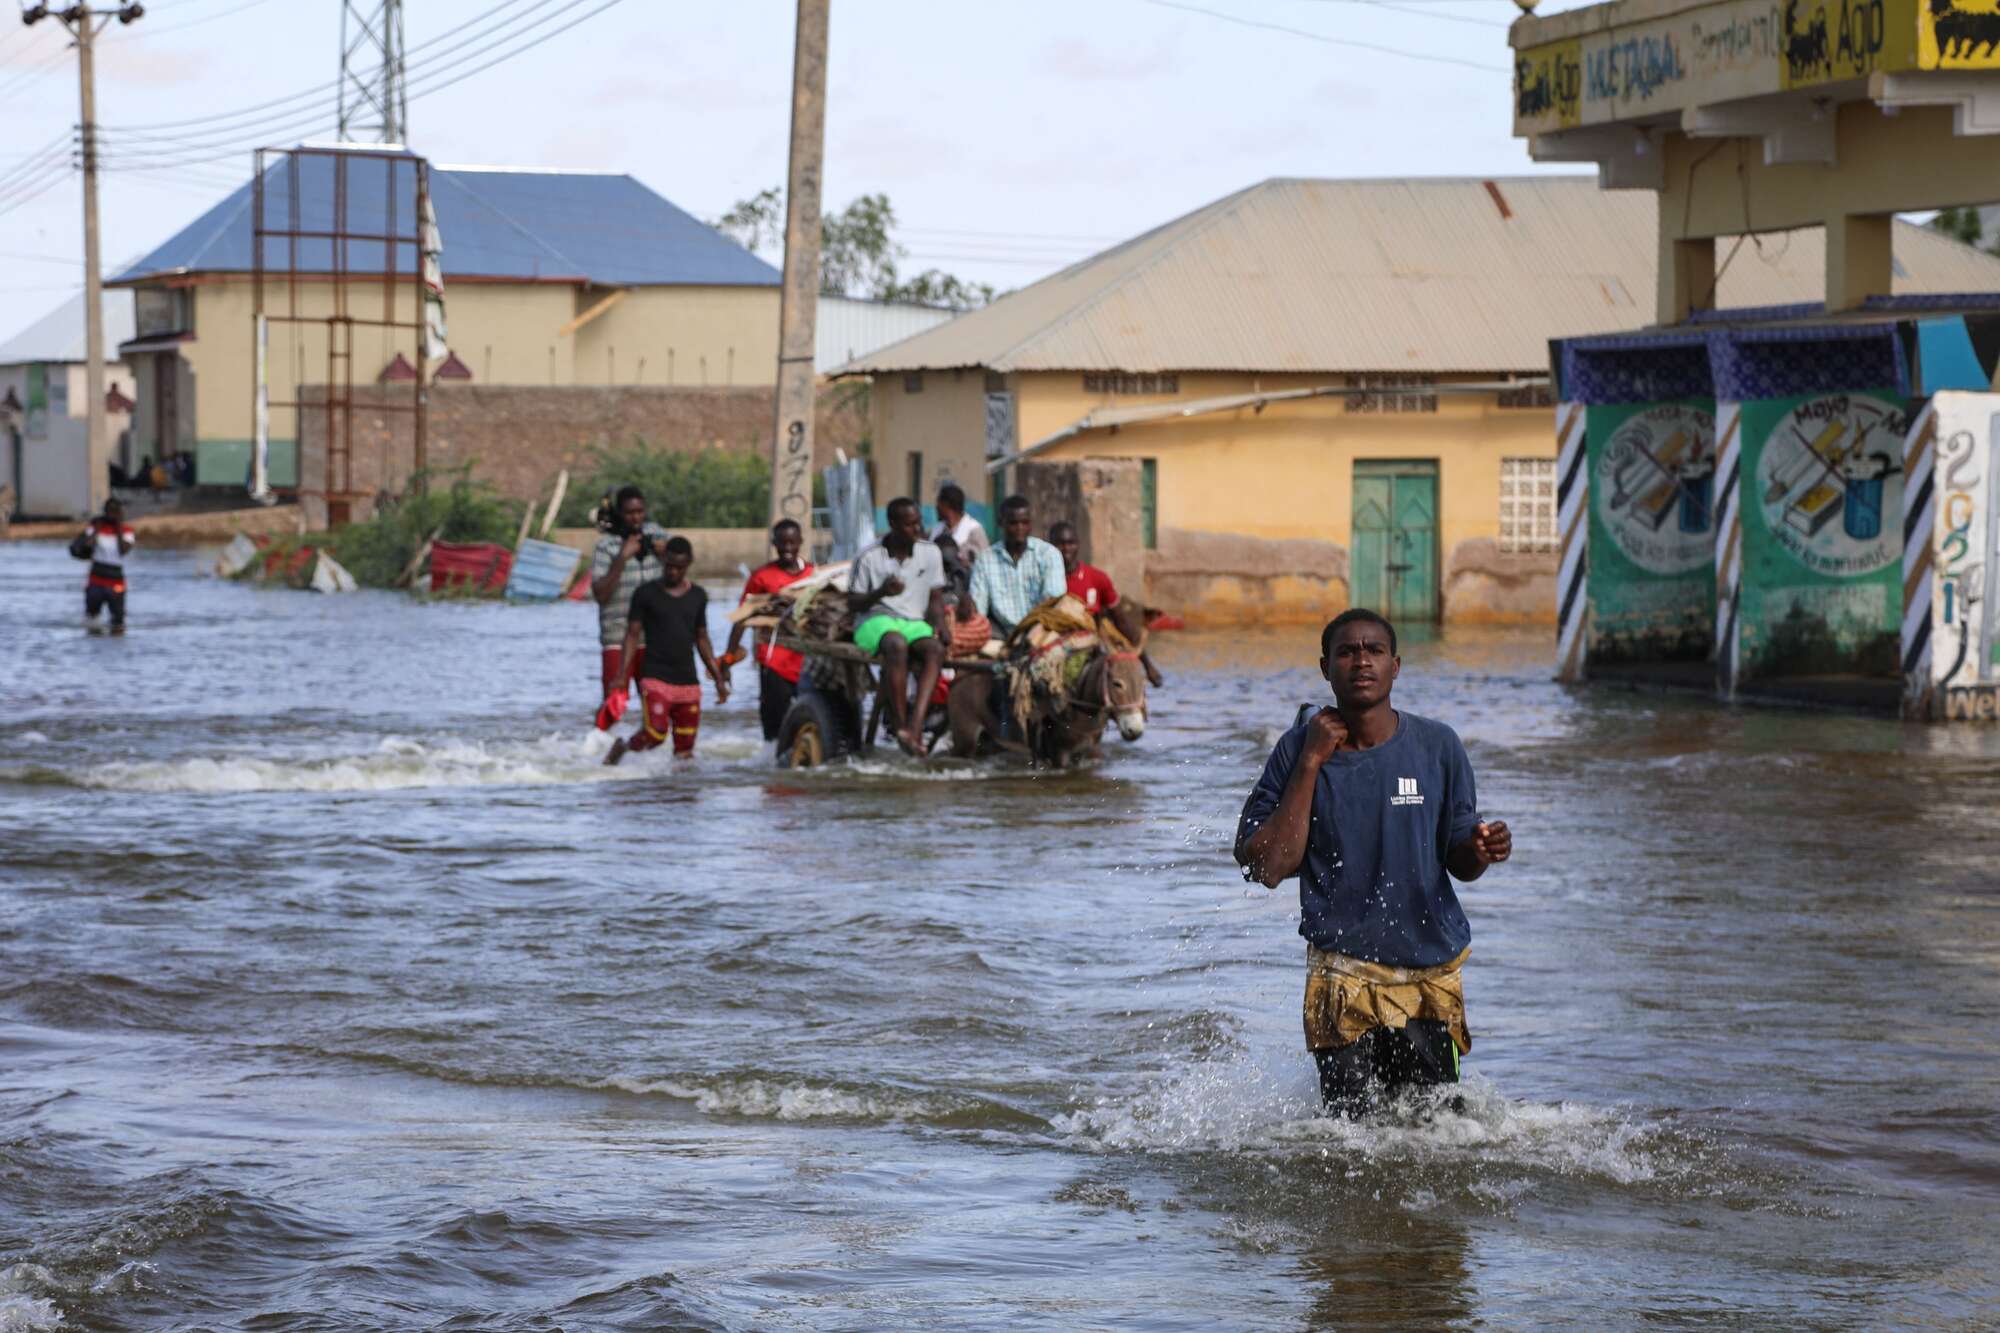 About 250,000 people flee floods in central Somalia 'ocean' town - The ...